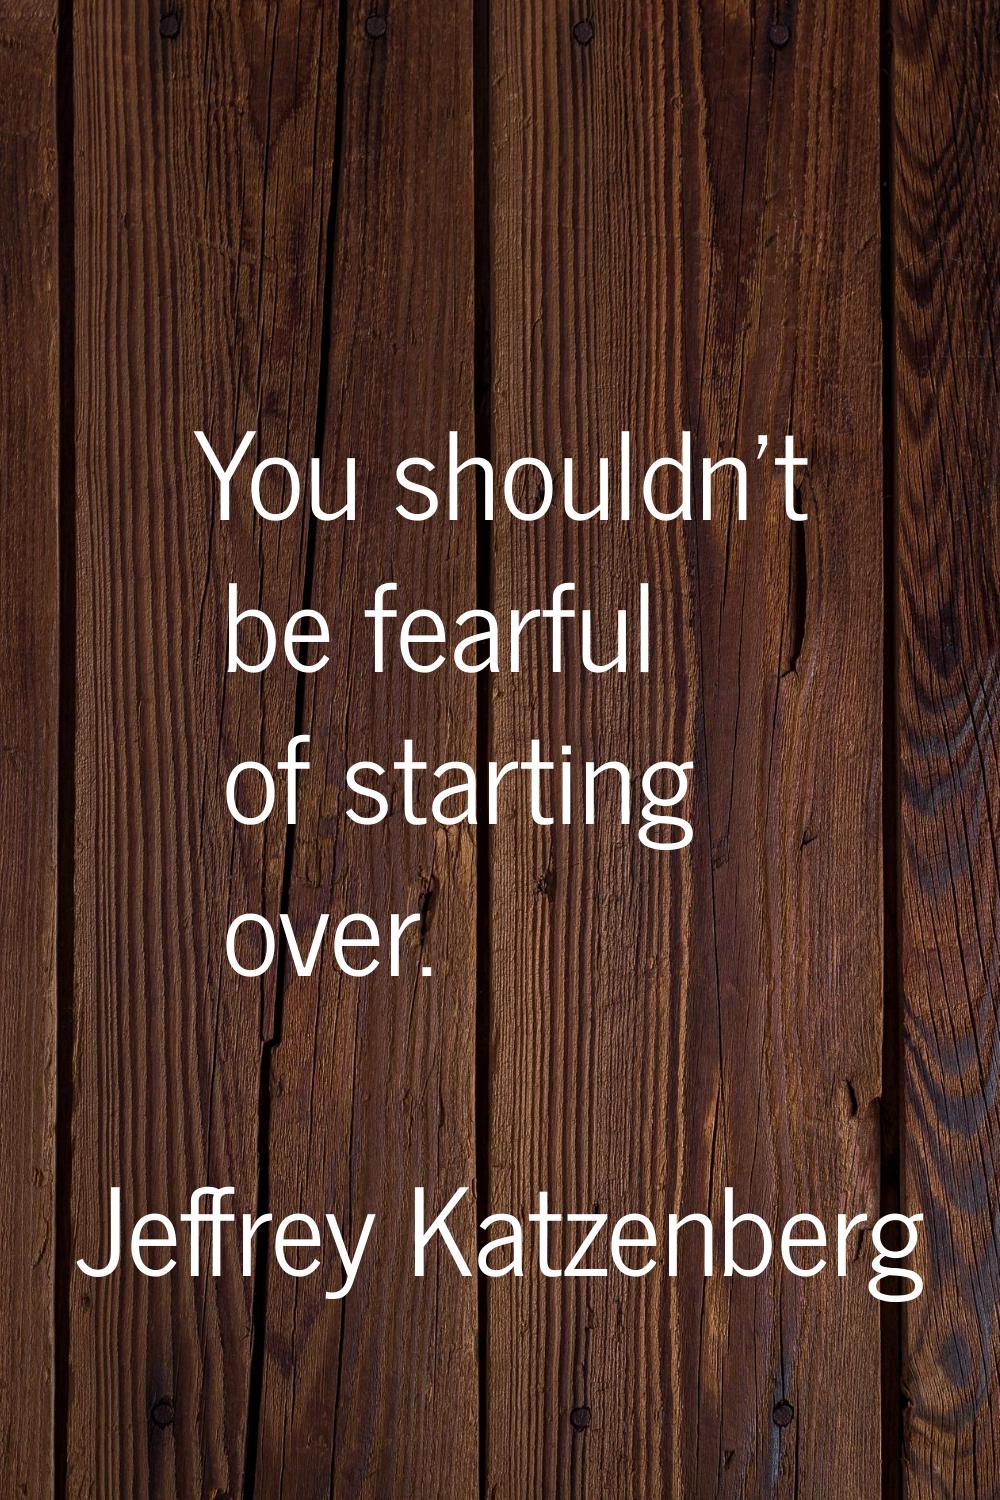 You shouldn't be fearful of starting over.